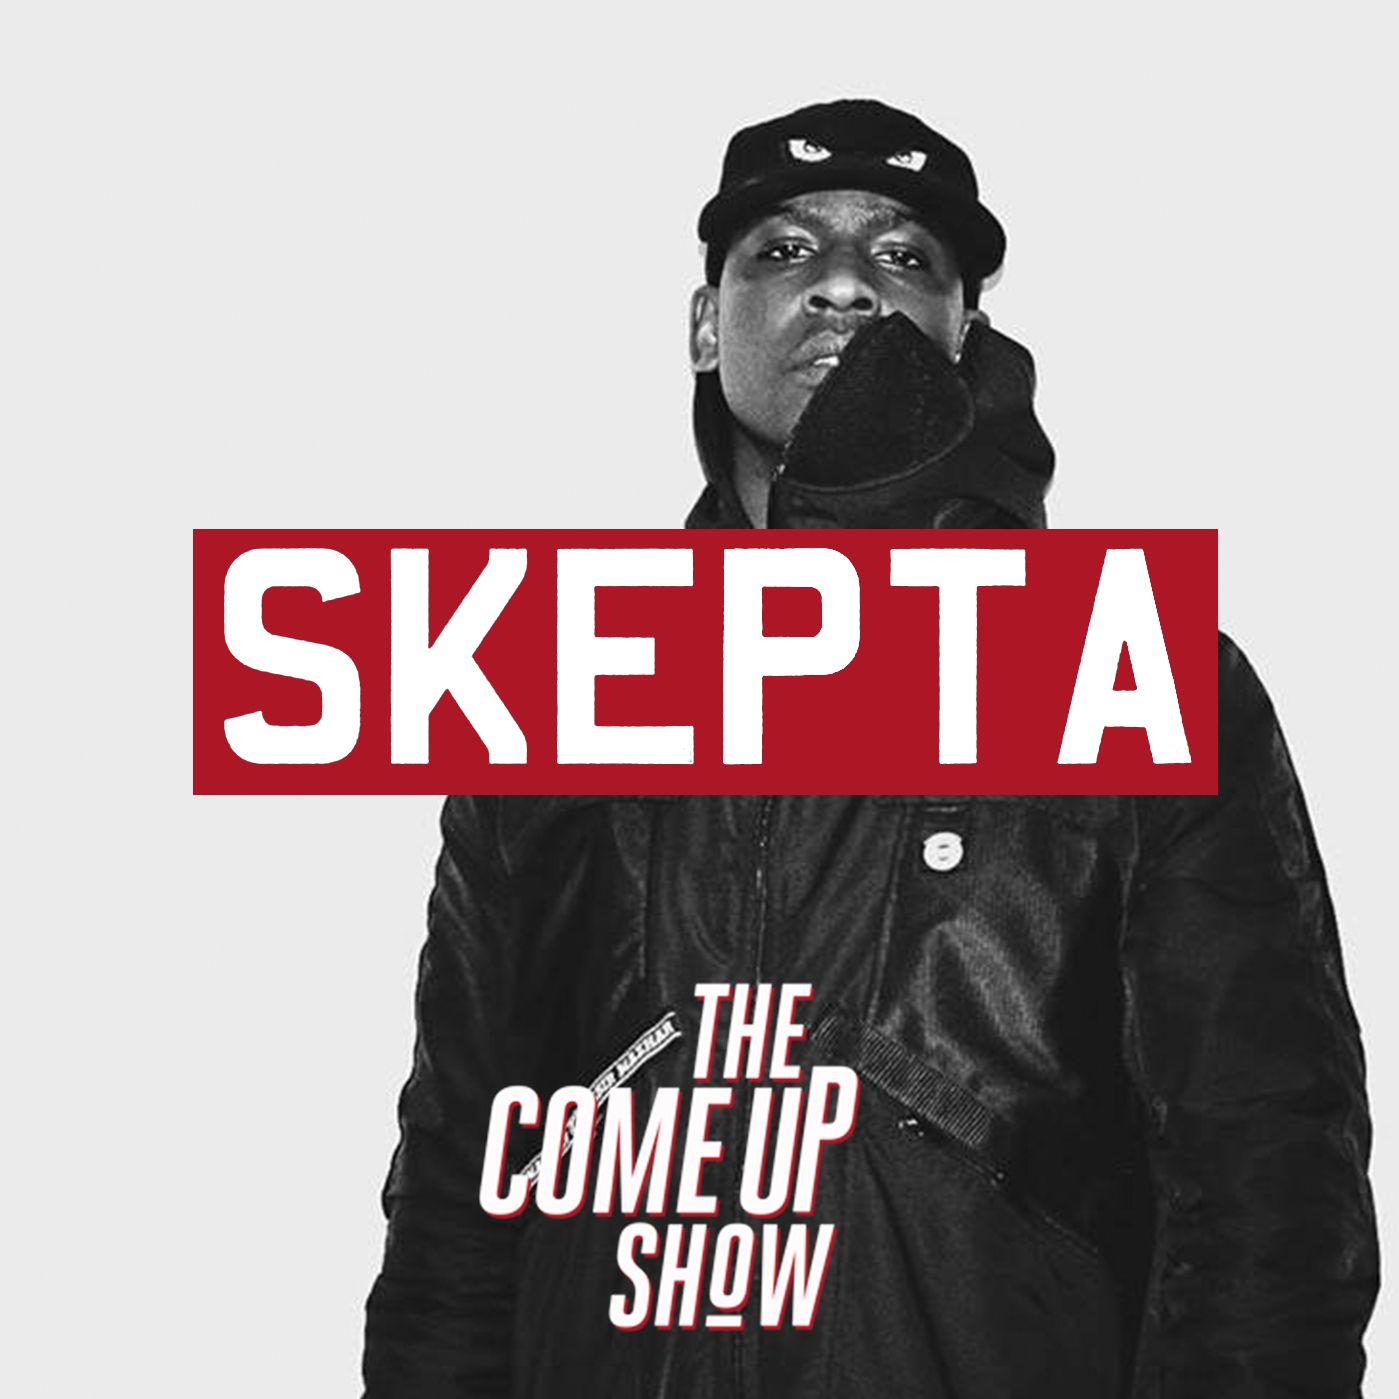 Thumbnail for "Skepta: A murderer in jail right now was one phone call away from a good friend".